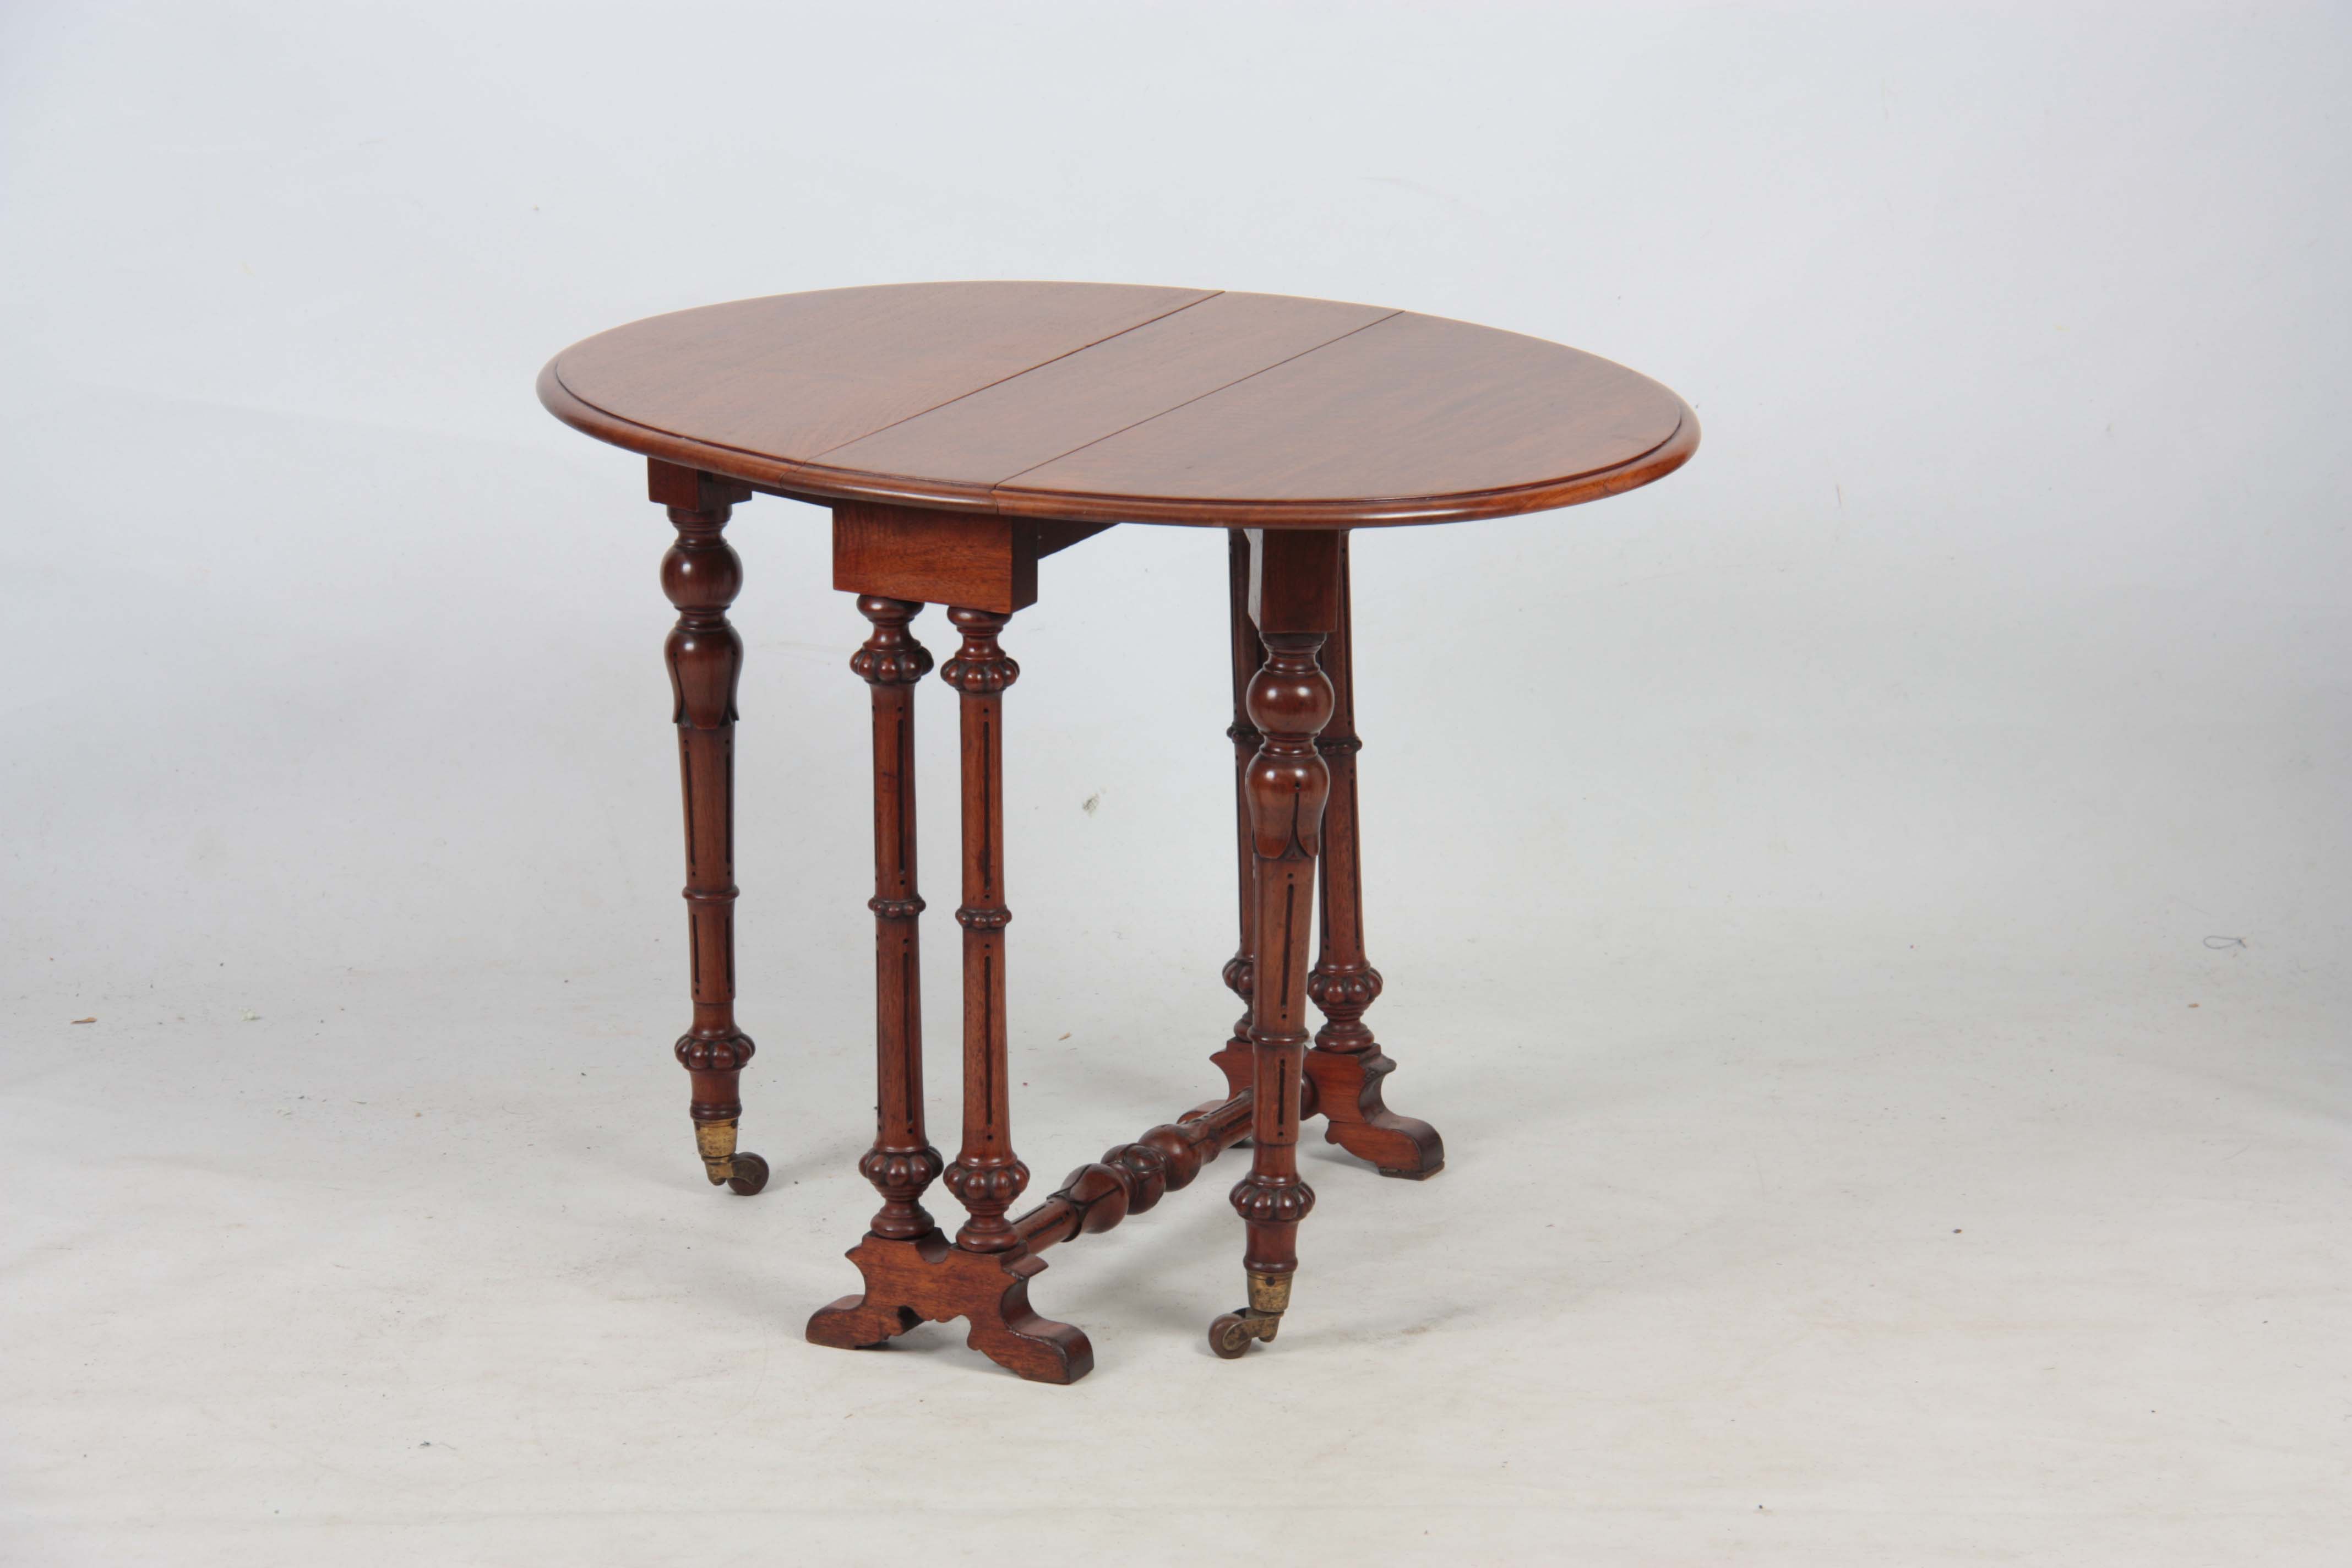 A 19TH CENTURY WALNUT MINIATURE SUTHERLAND TABLE with moulded edge oval top above a turned base with - Image 5 of 7